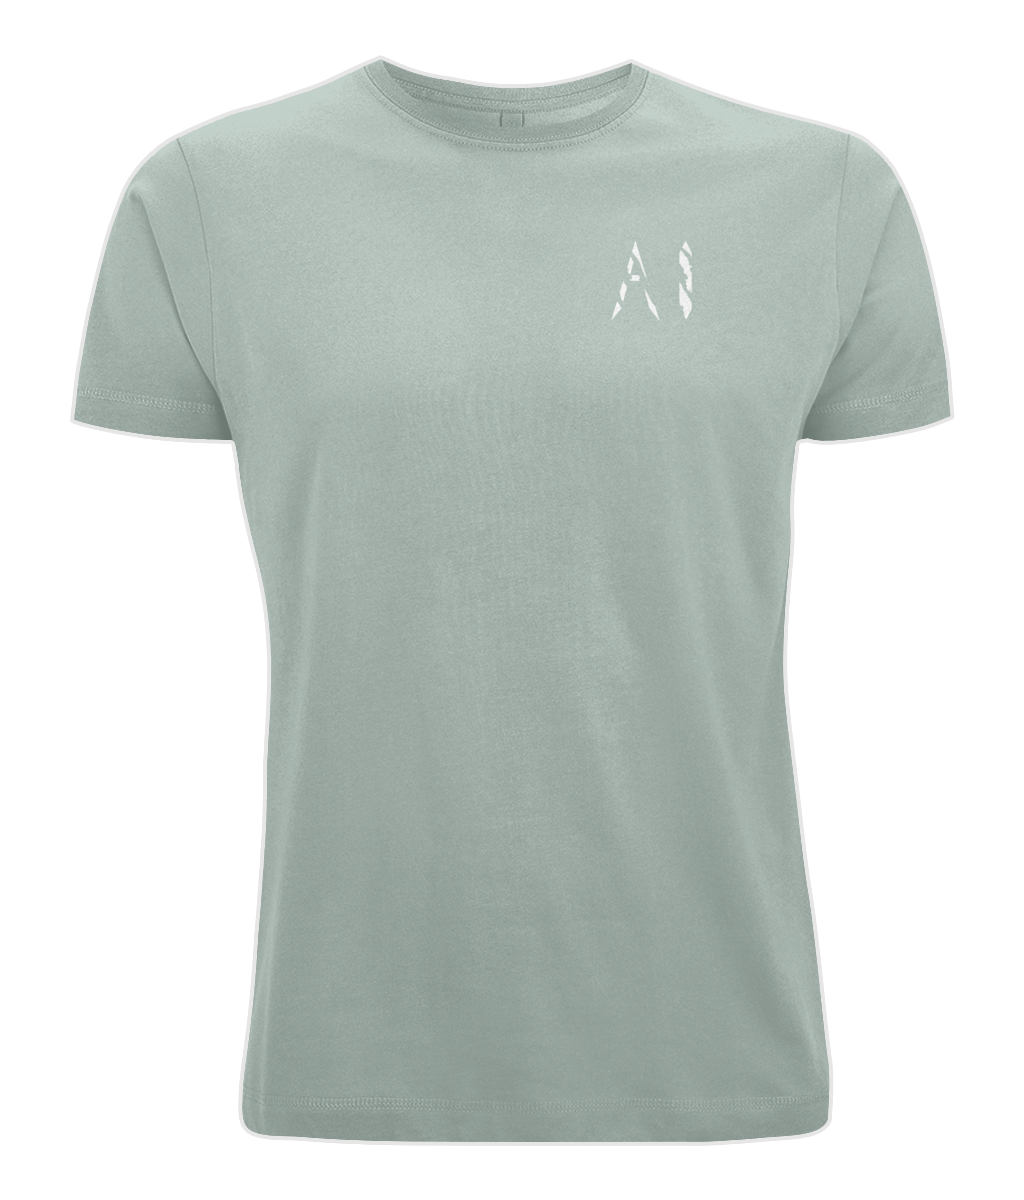 Mens teal Oversized Pump Cover T-Shirt with white AI logo on left chest